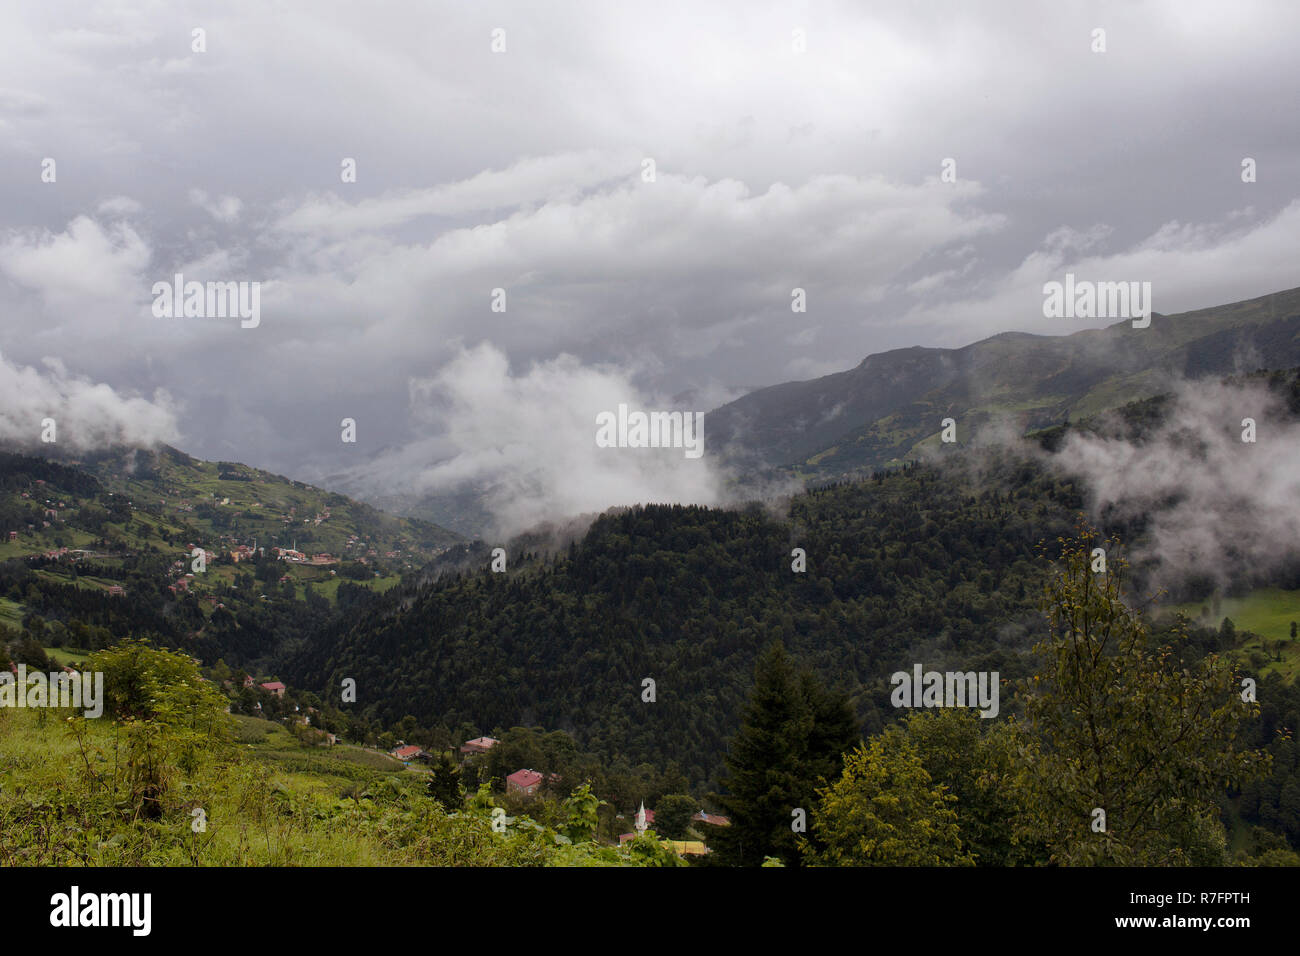 View of forest trees, mountains, valley and beautiful nature in fog. The image is captured in Trabzon/Rize area of Black Sea region located at northea Stock Photo